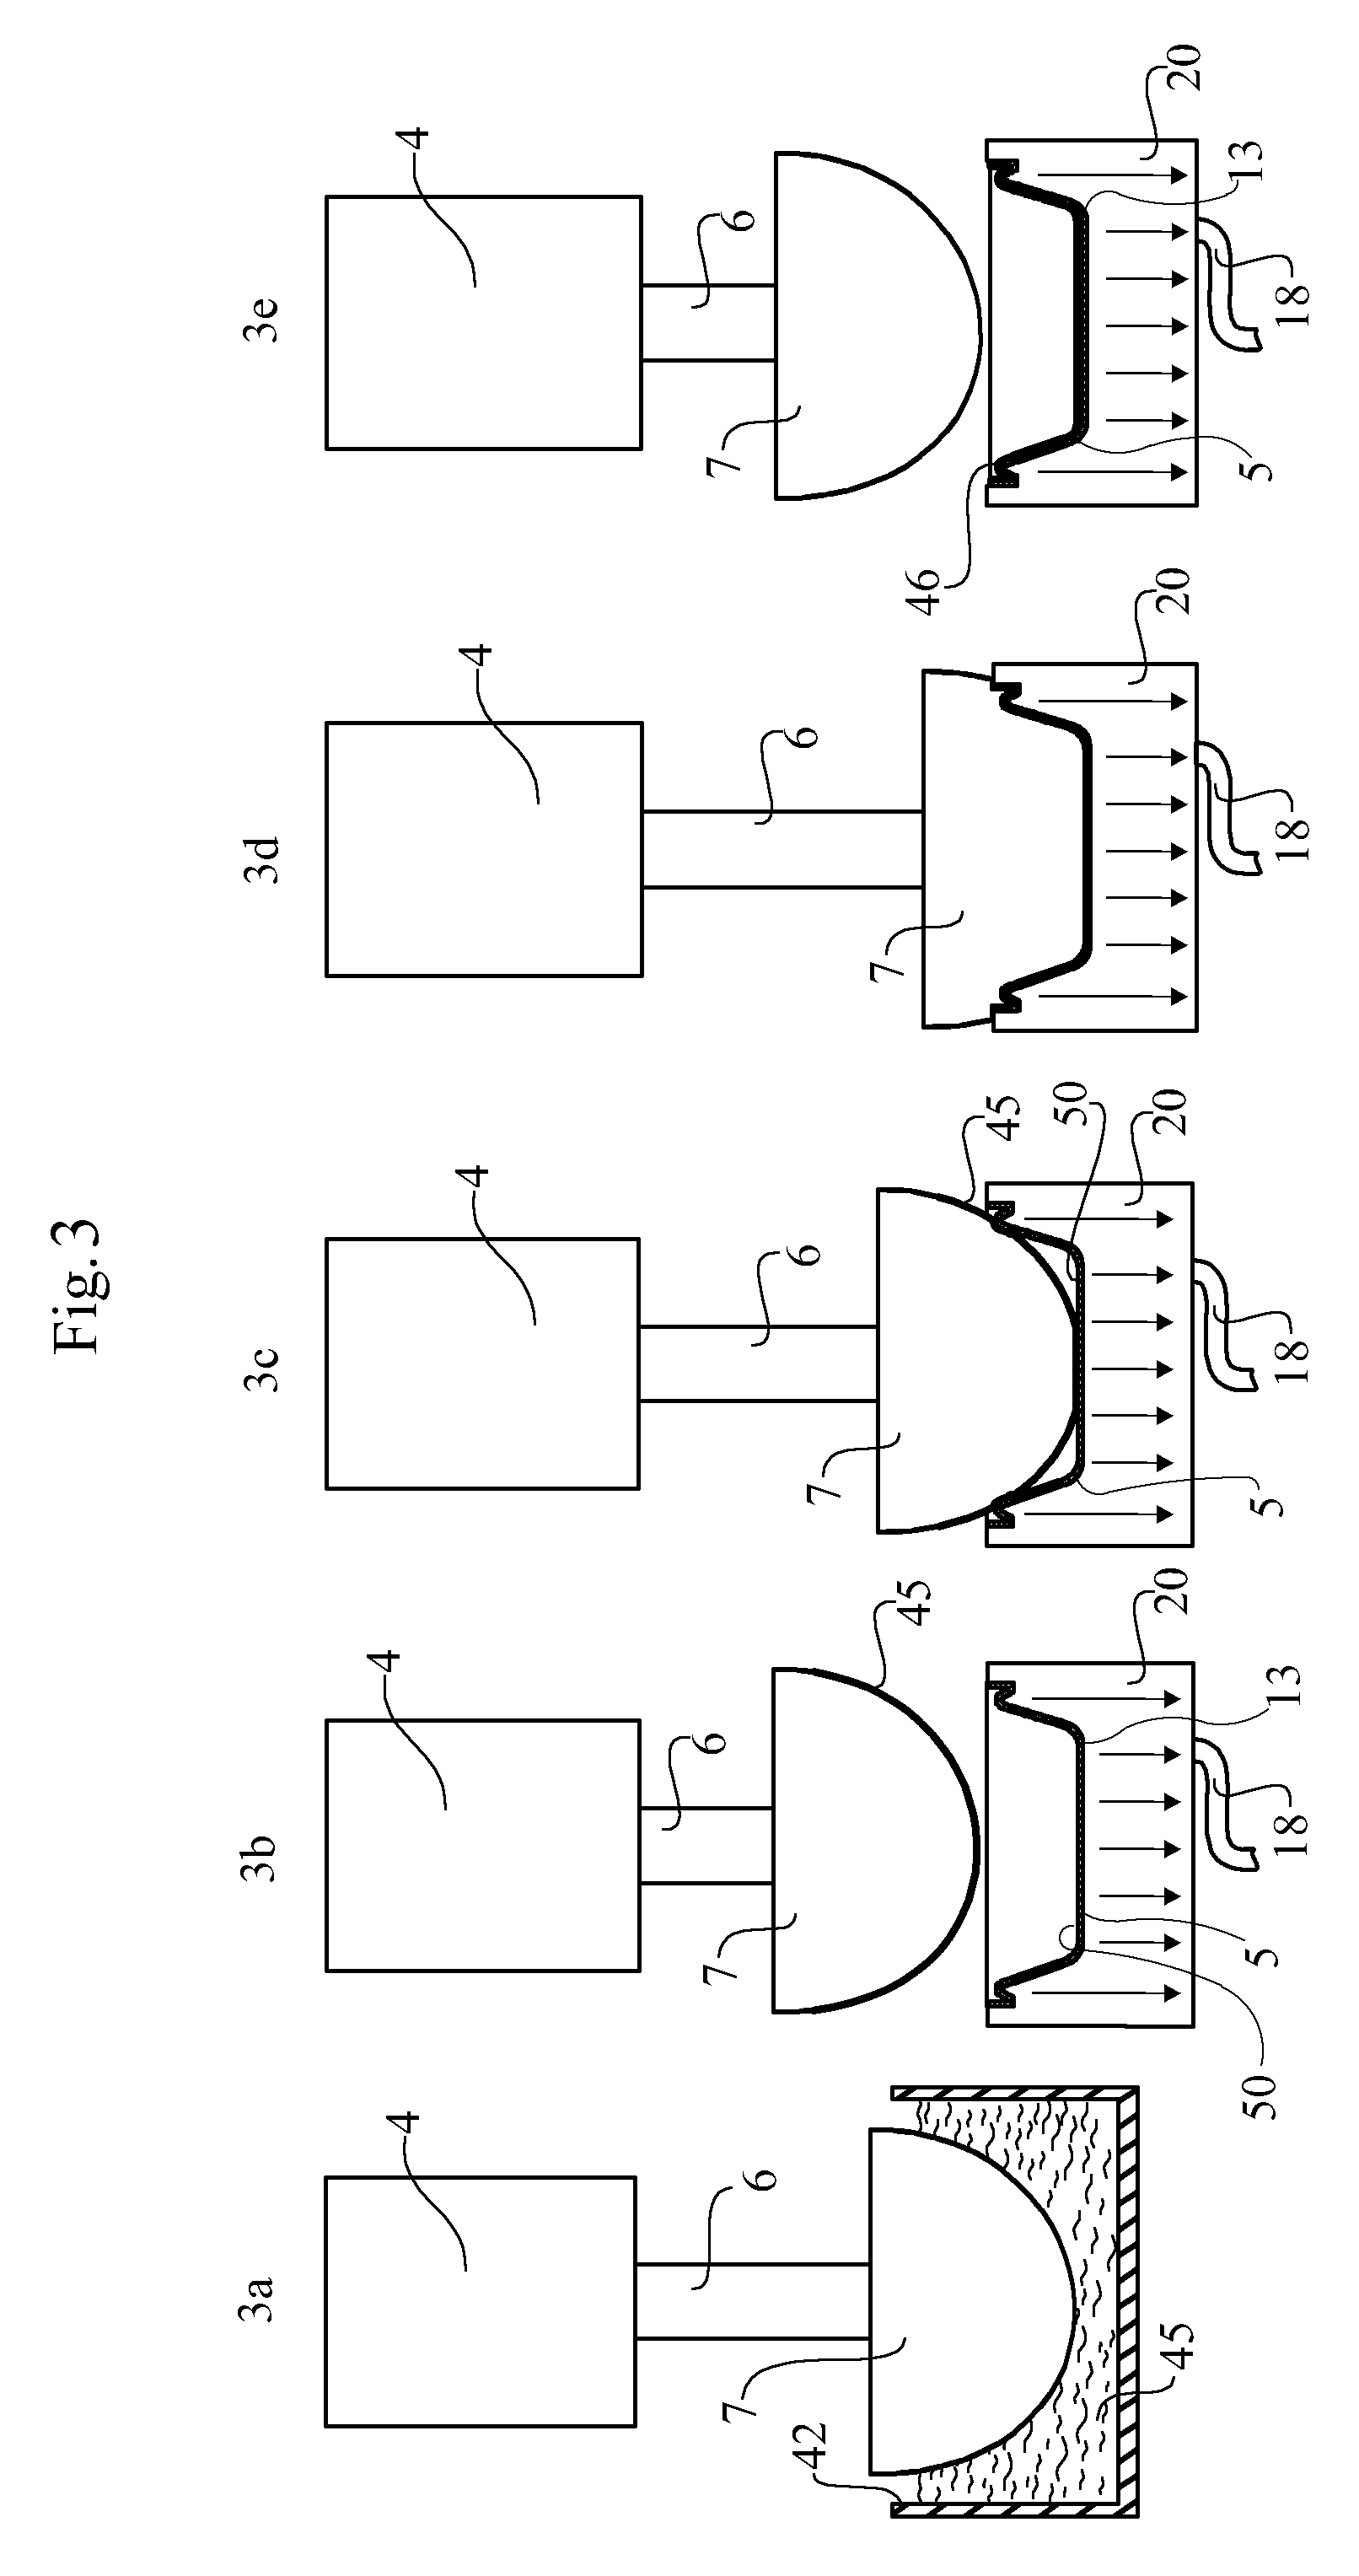 Method for Applying a Barrier on Moulded Fibrous Product and a Product Produced by Said Method